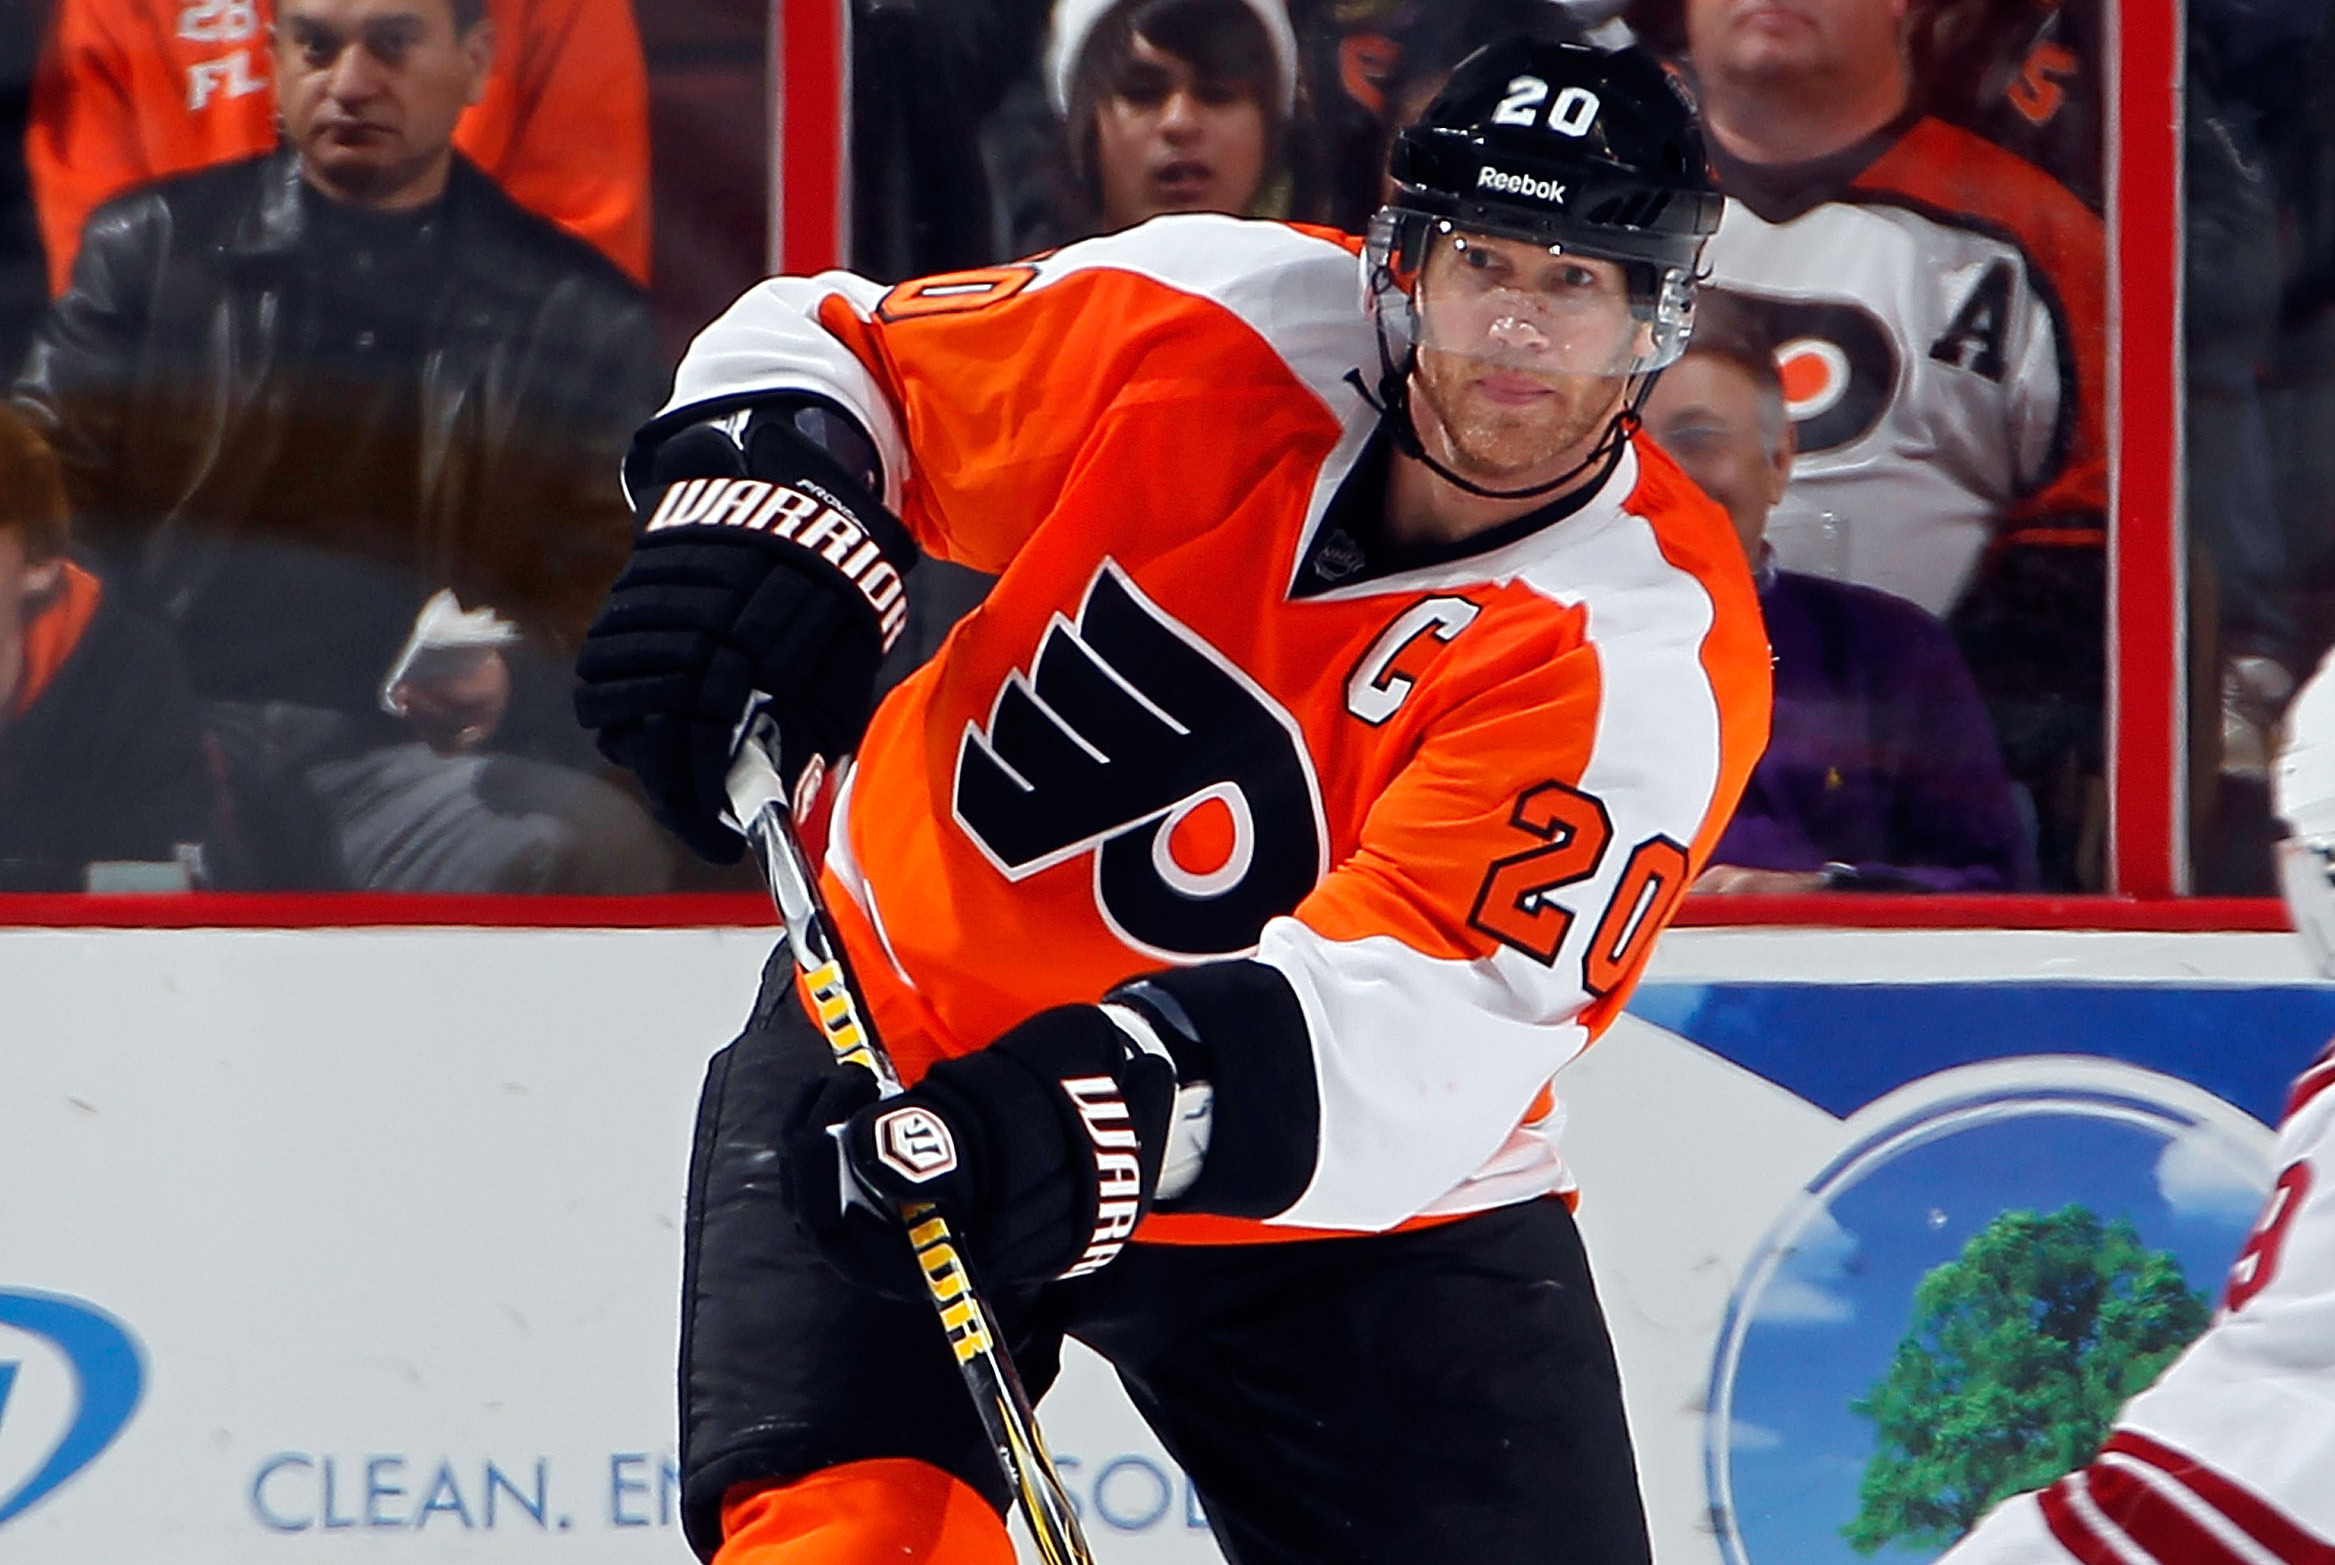 Flyers' Pronger out indefinitely